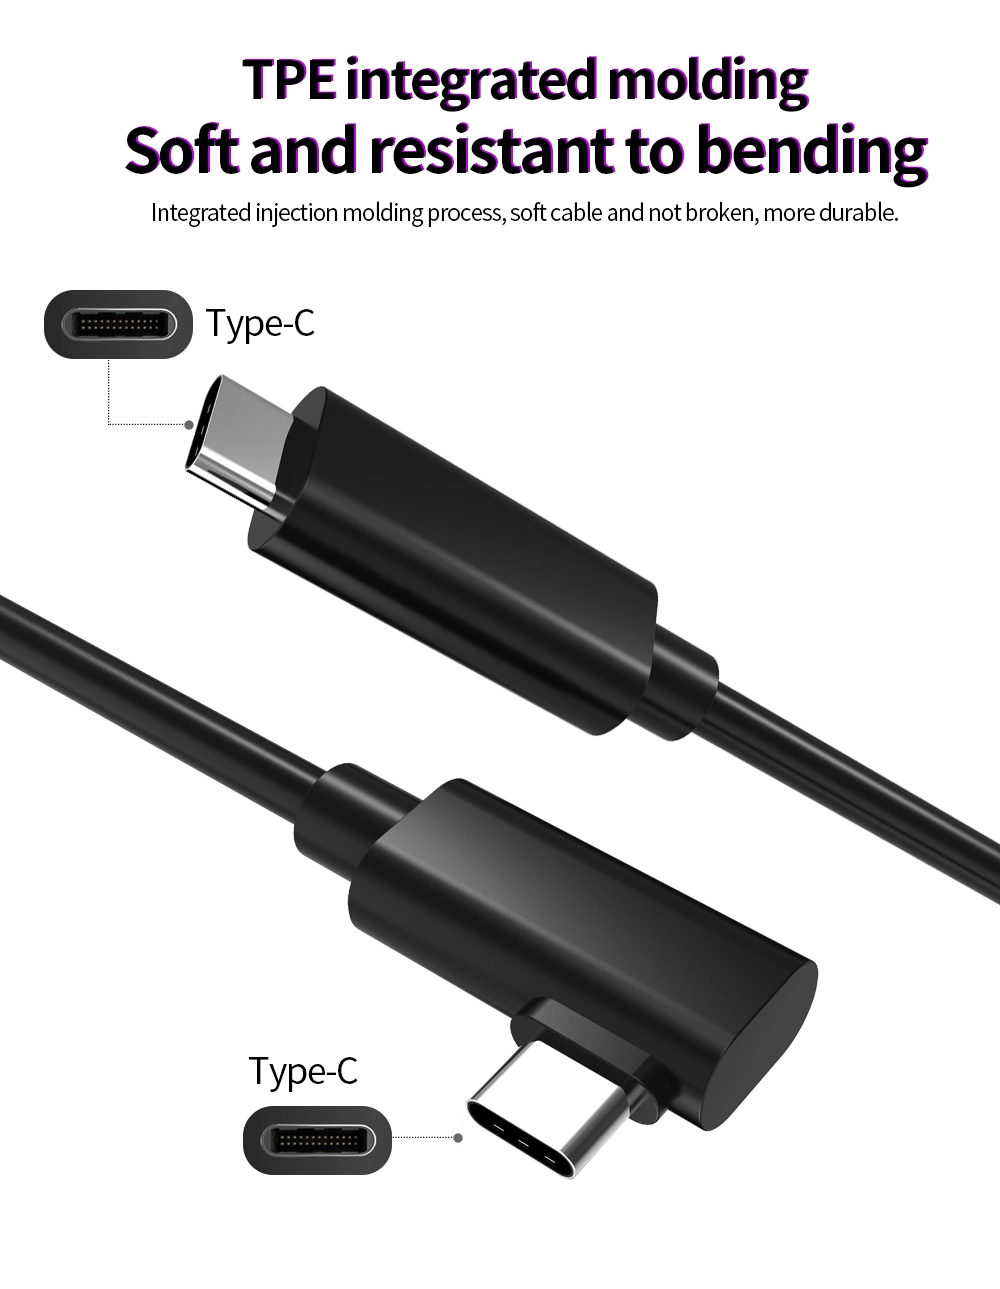 5m USB 3.0 Type C Vr Cable Support 3A Fast Charging and 5gbps Data Transfer for Oculus Link